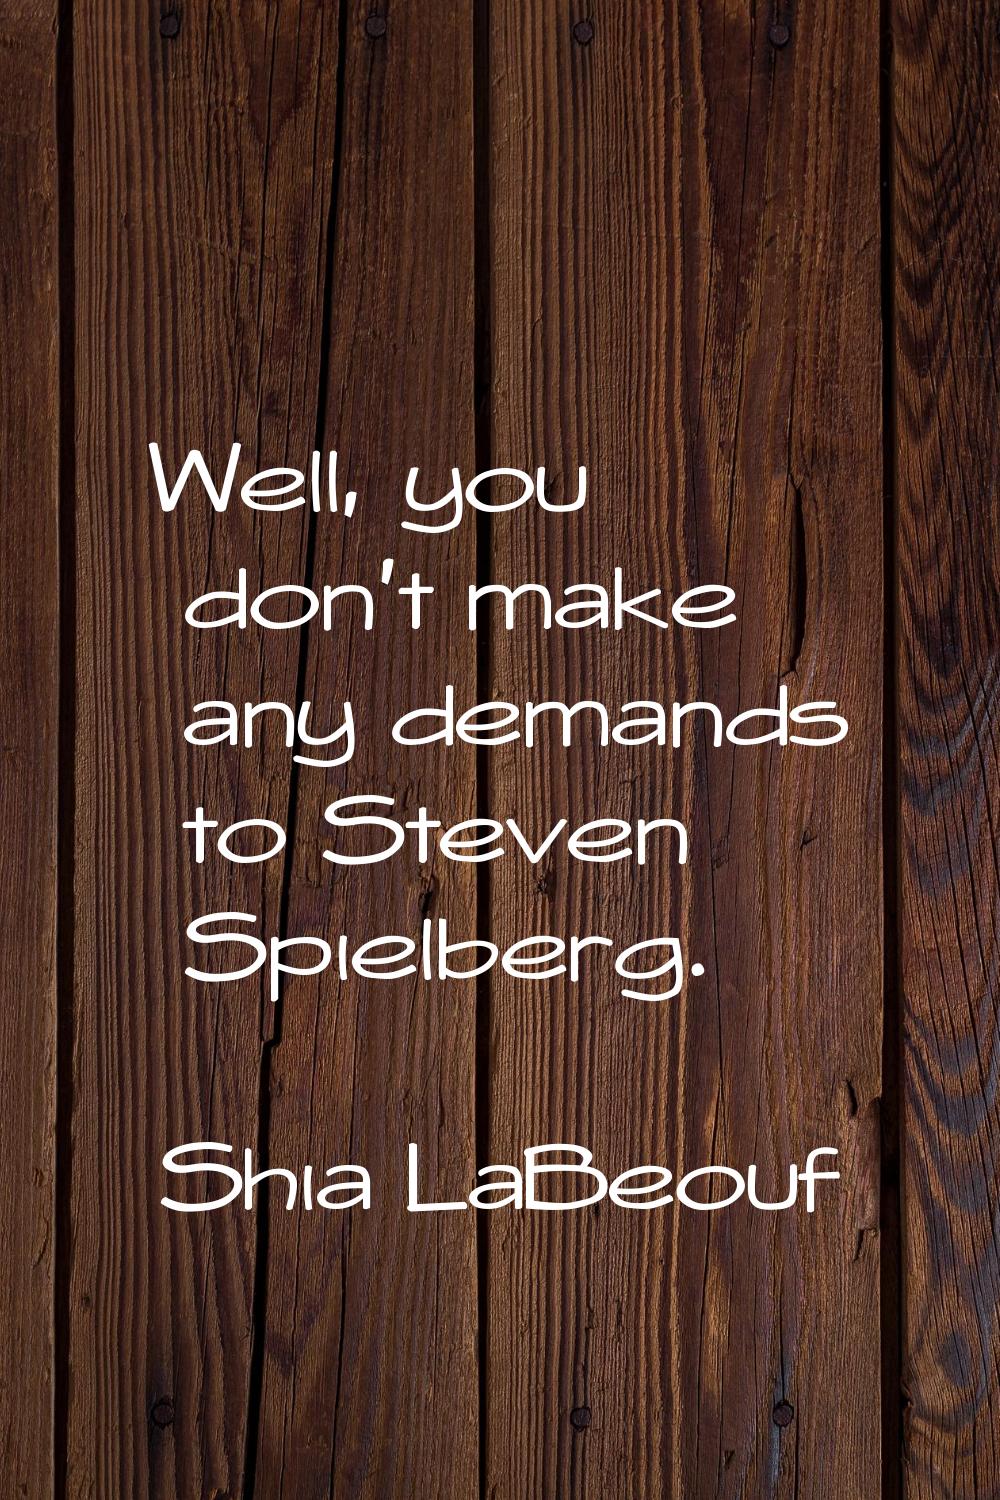 Well, you don't make any demands to Steven Spielberg.